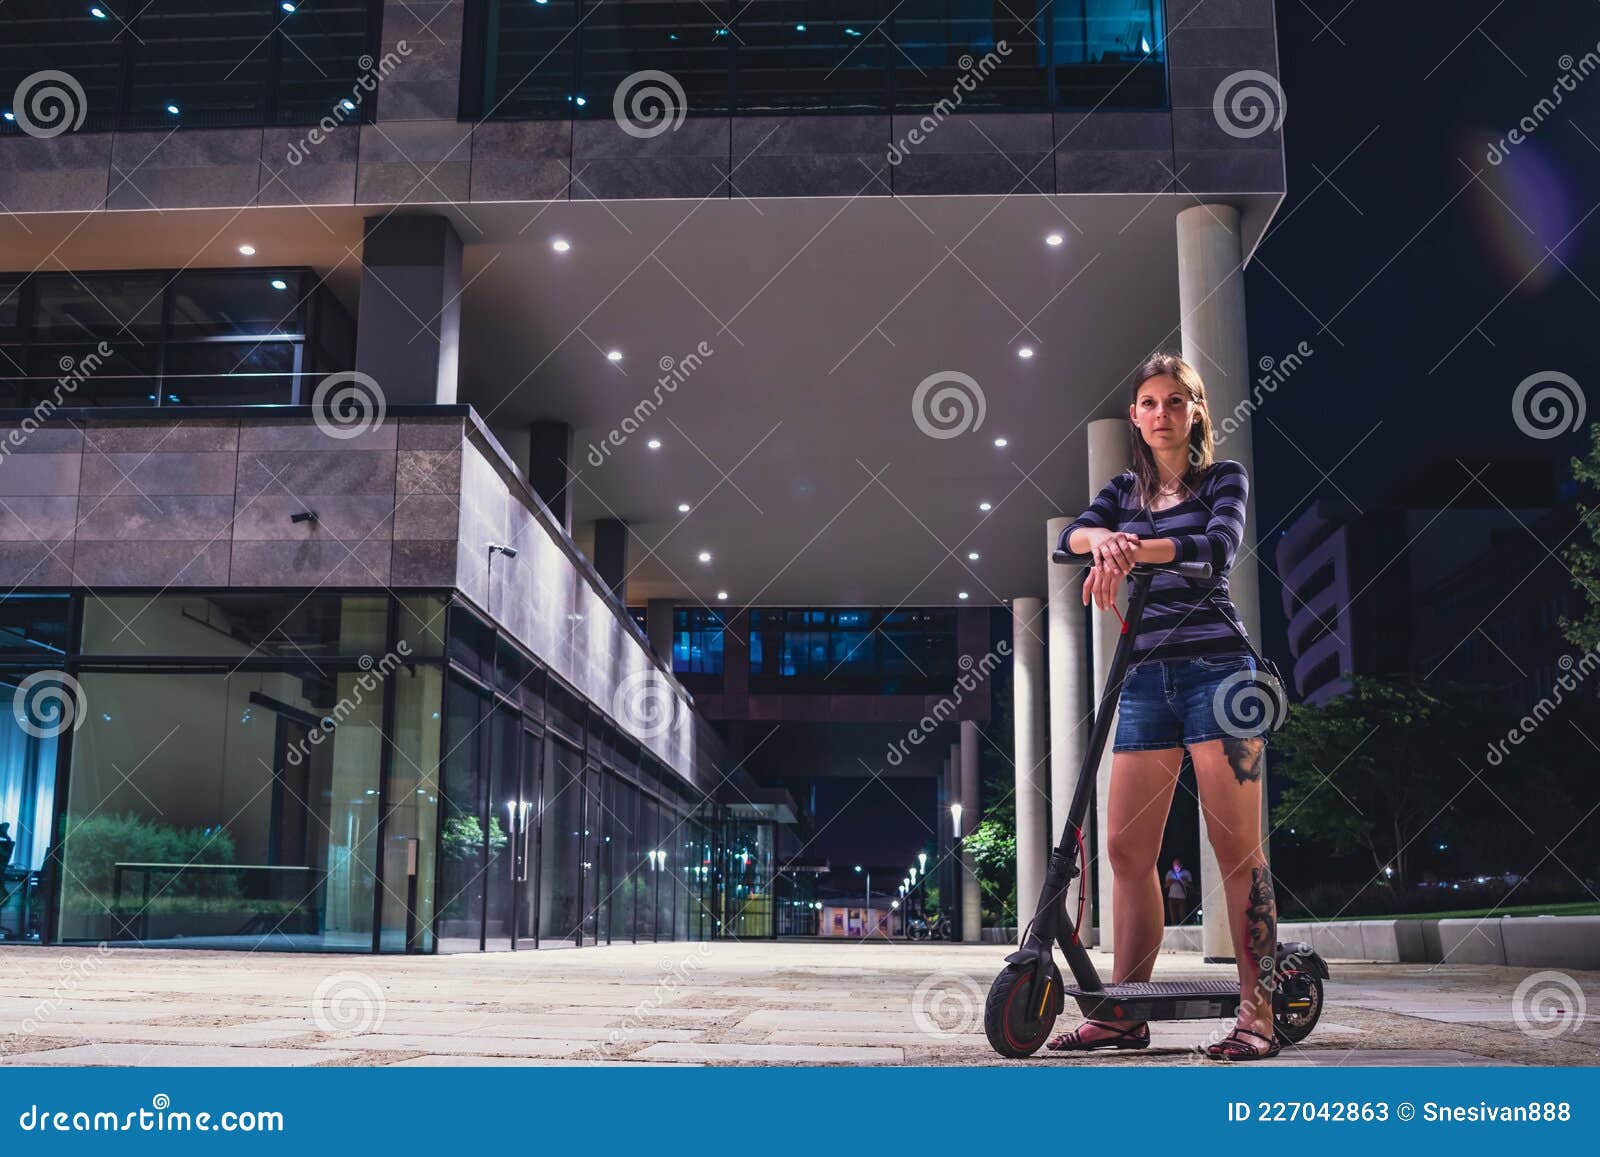 young woman at night on a scooter in the busines center